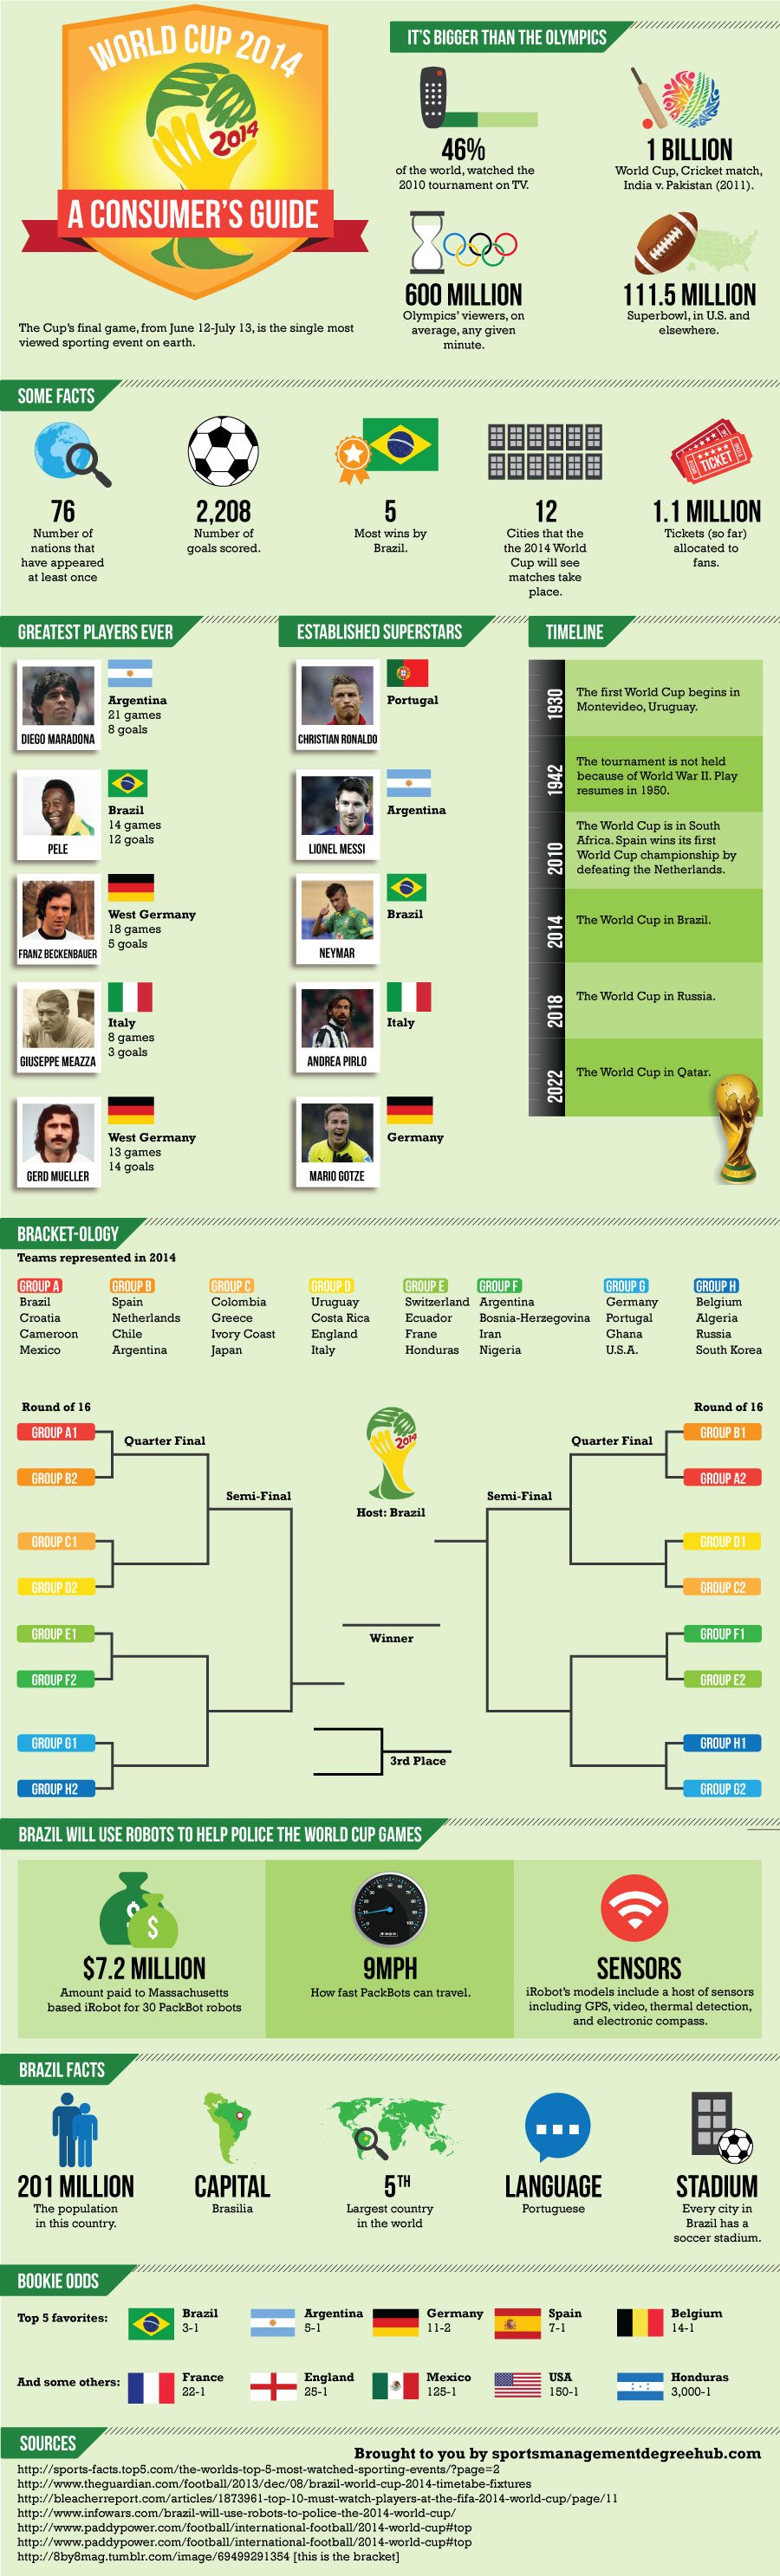 World Cup 2014: all our biggest and best features in one place